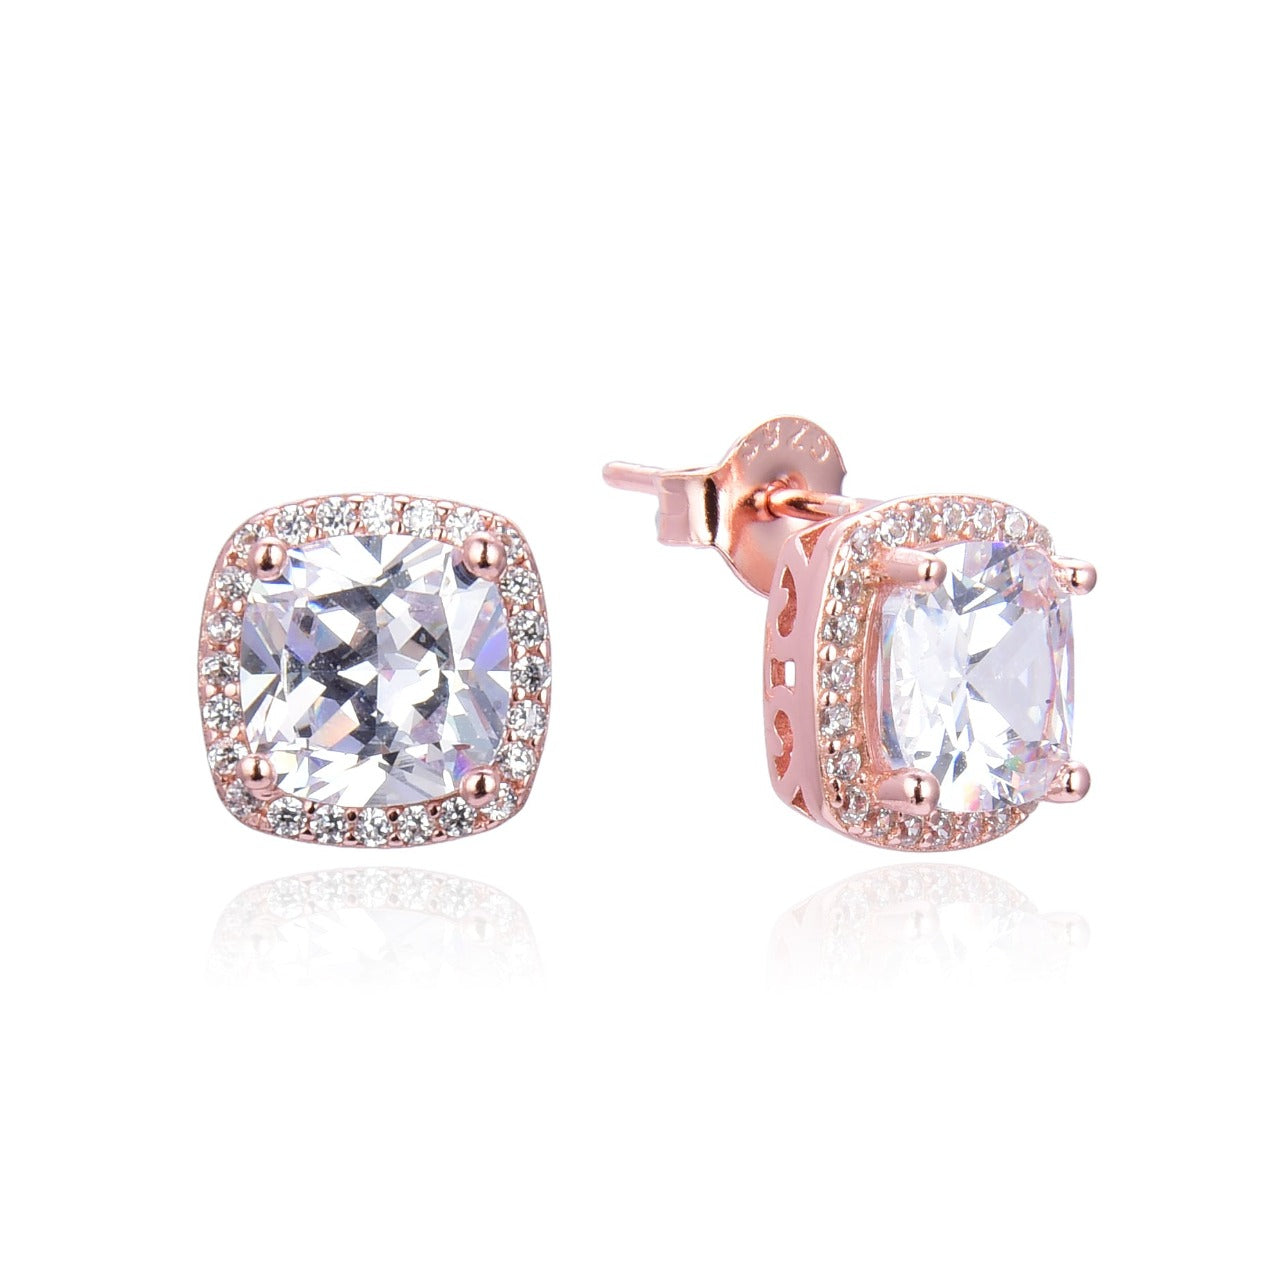 Kilkenny Silver Rose Gold  Square Halo Stud Earrings  Rose gold plated sterling silver square halo stud earrings with cubic zirconia stones.